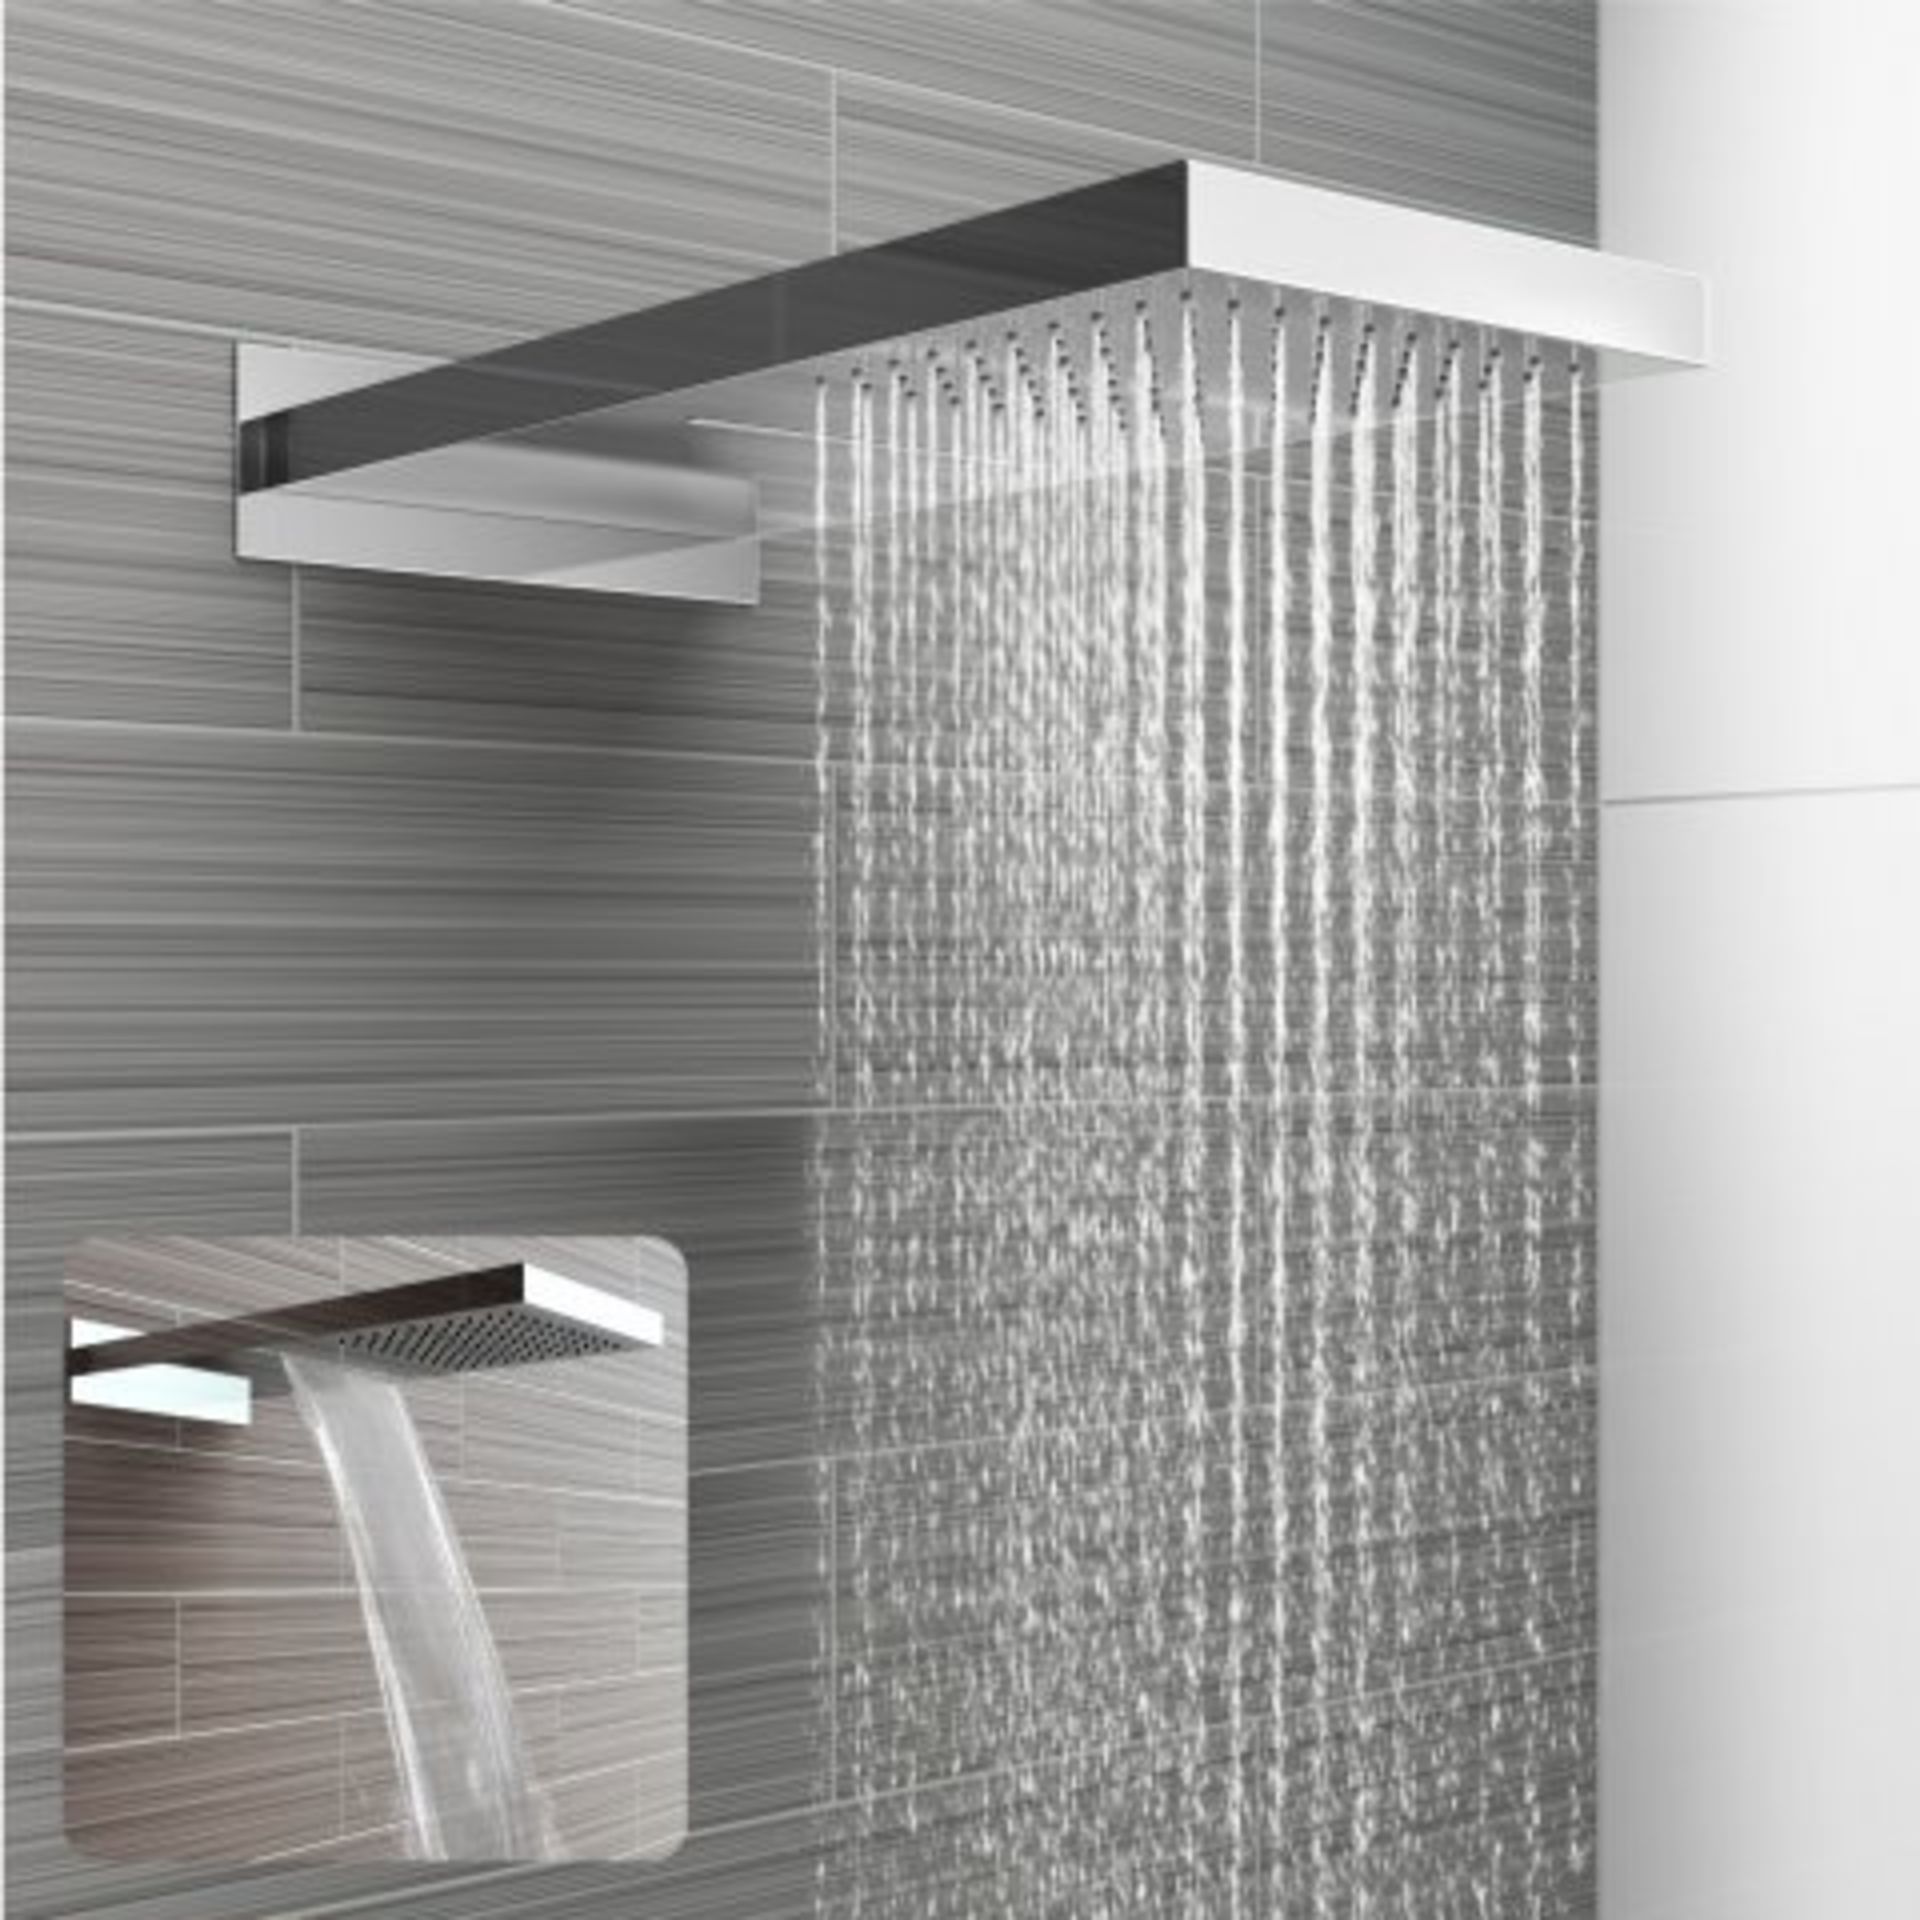 (I49) Stainless Steel 200x500mm Waterfall Shower Head RRP £374.99 "What An Experience": Enjoy